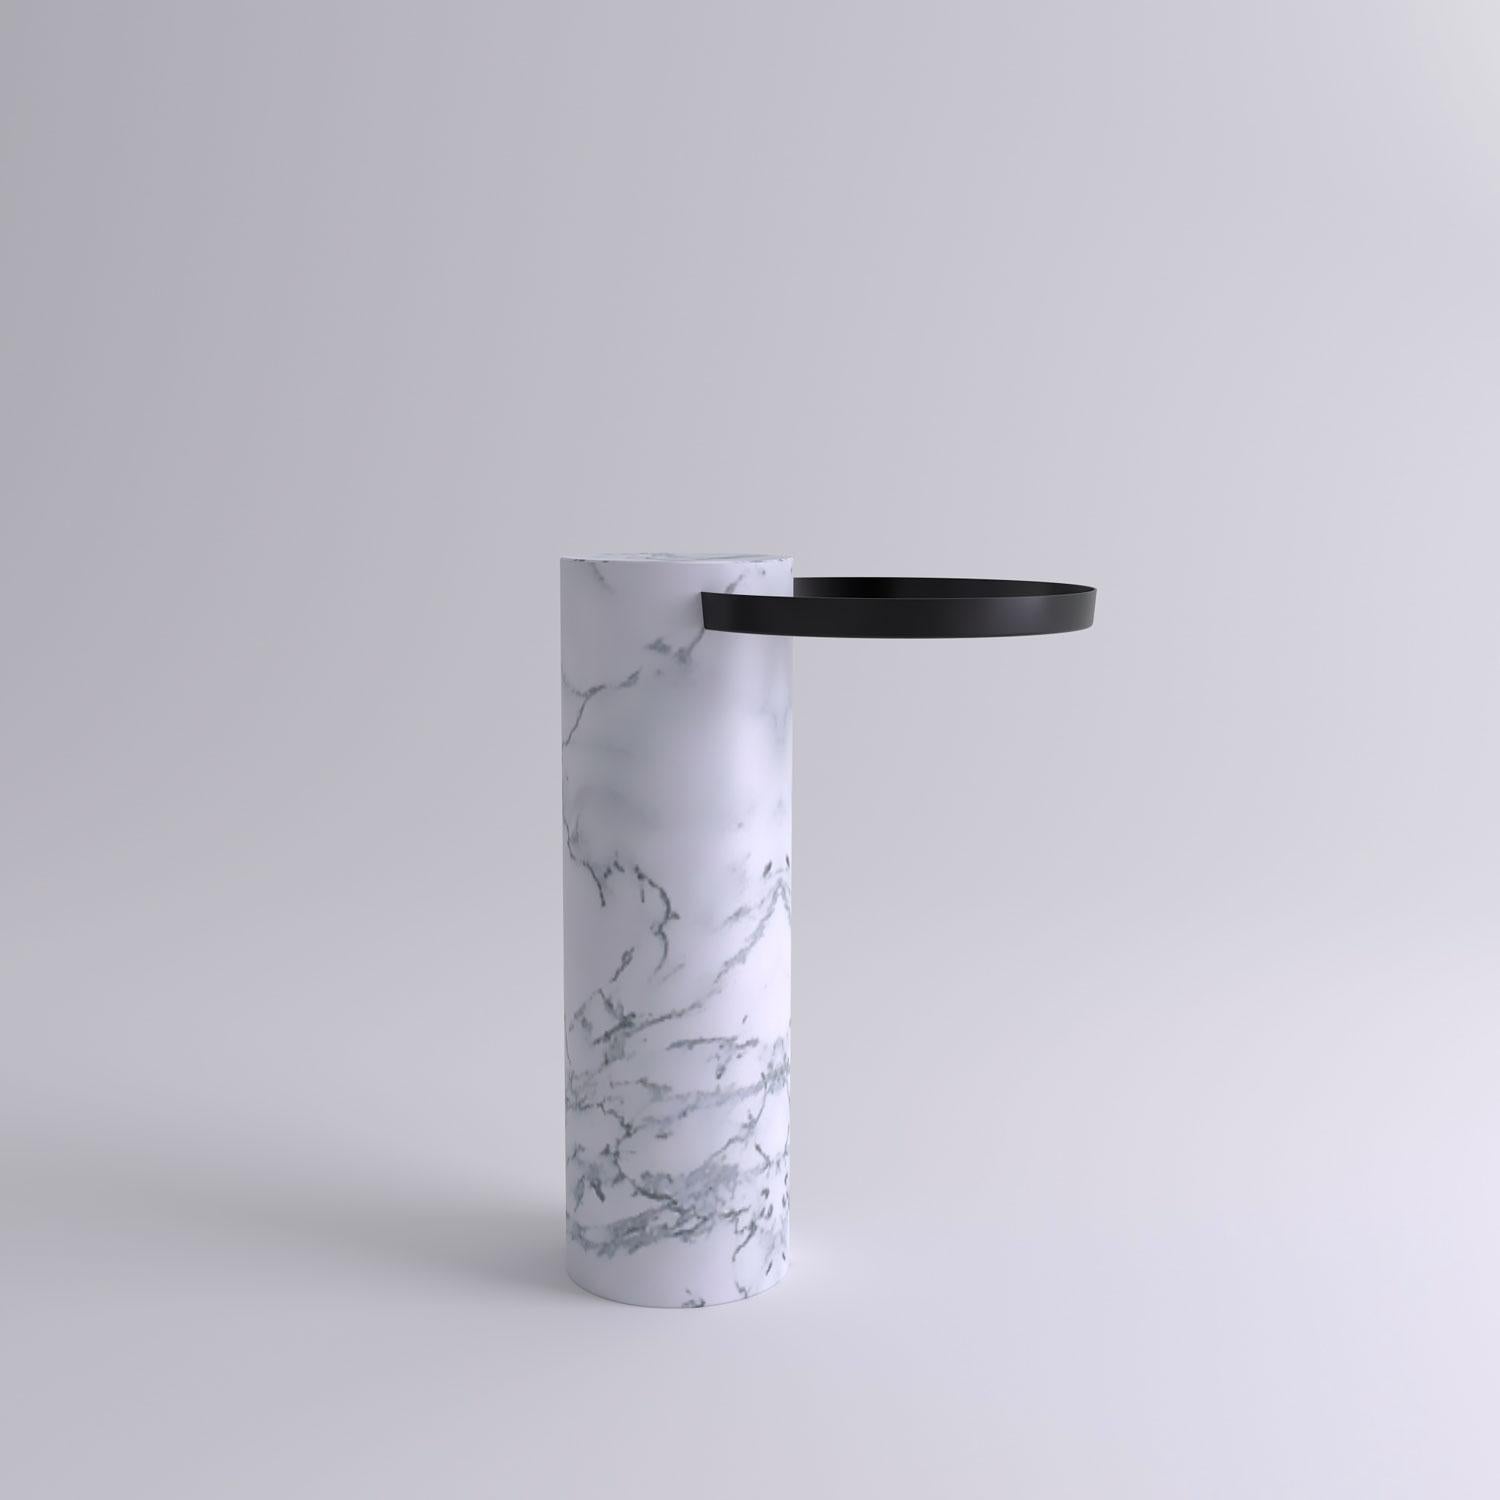 High white marble contemporary guéridon, Sebastian Herkner
Dimensions: D 42 x H 57 cm
Materials: Pele de Tigre marble, black metal tray

The salute table exists in 3 sizes, 4 different marble stones for the column and 5 different finishes for